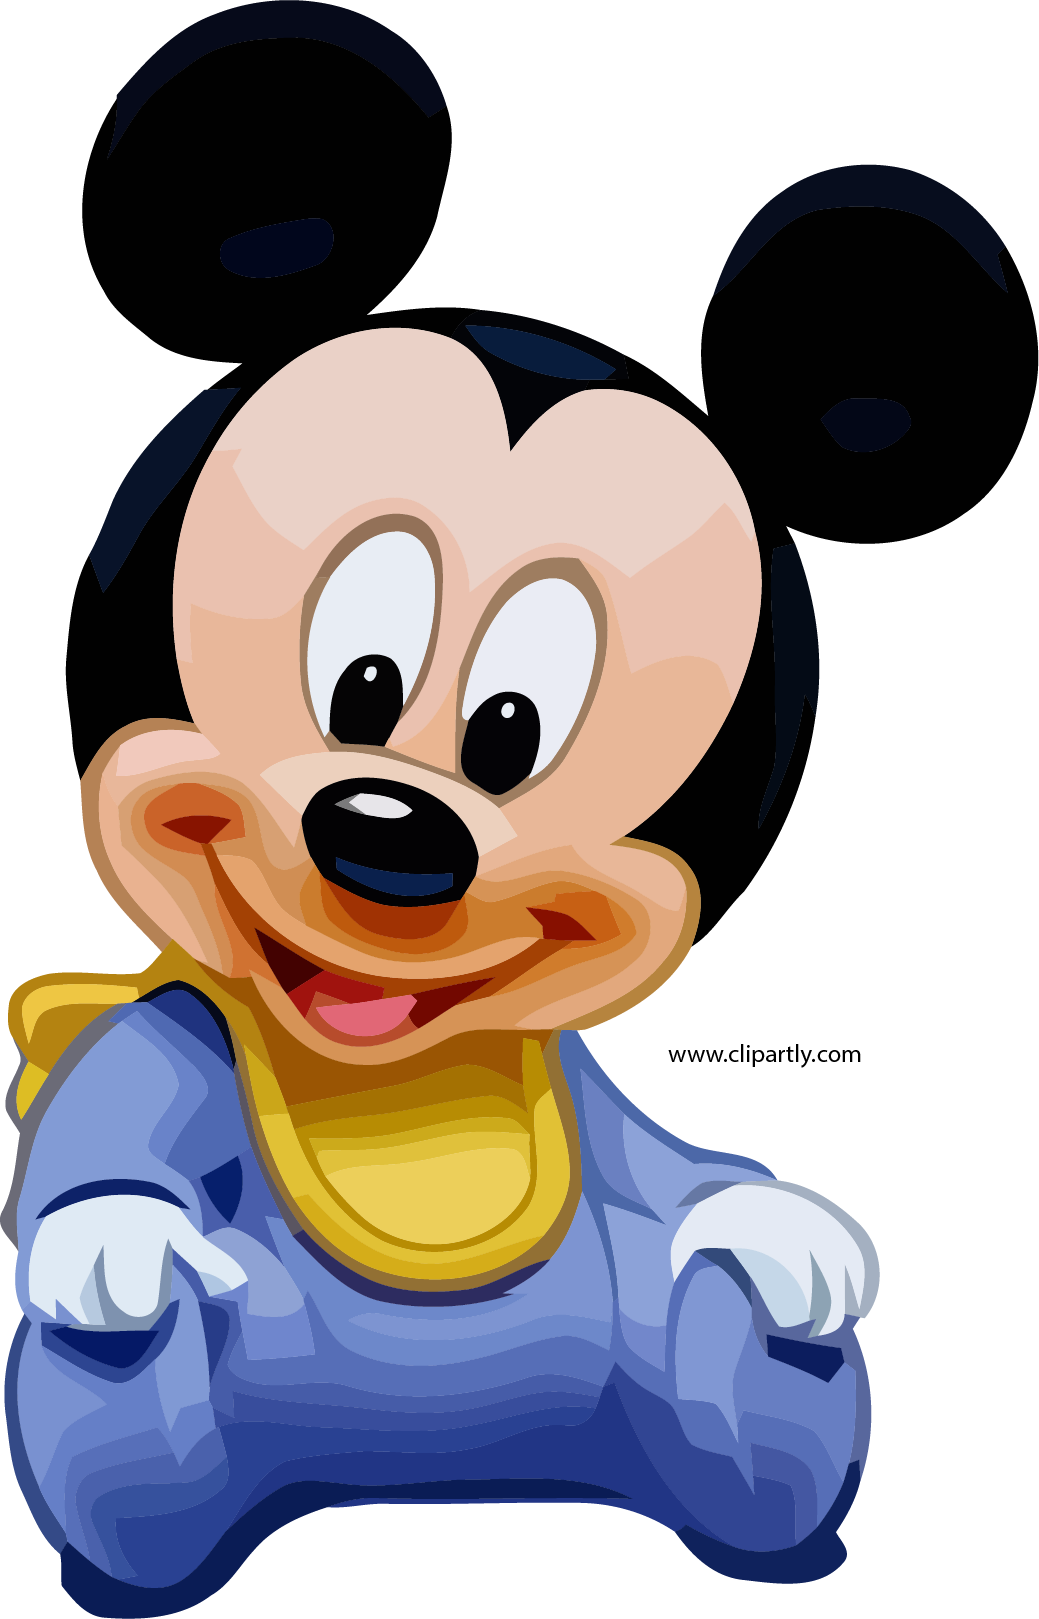 Baby Mickey Mouse Cartoon PNG image